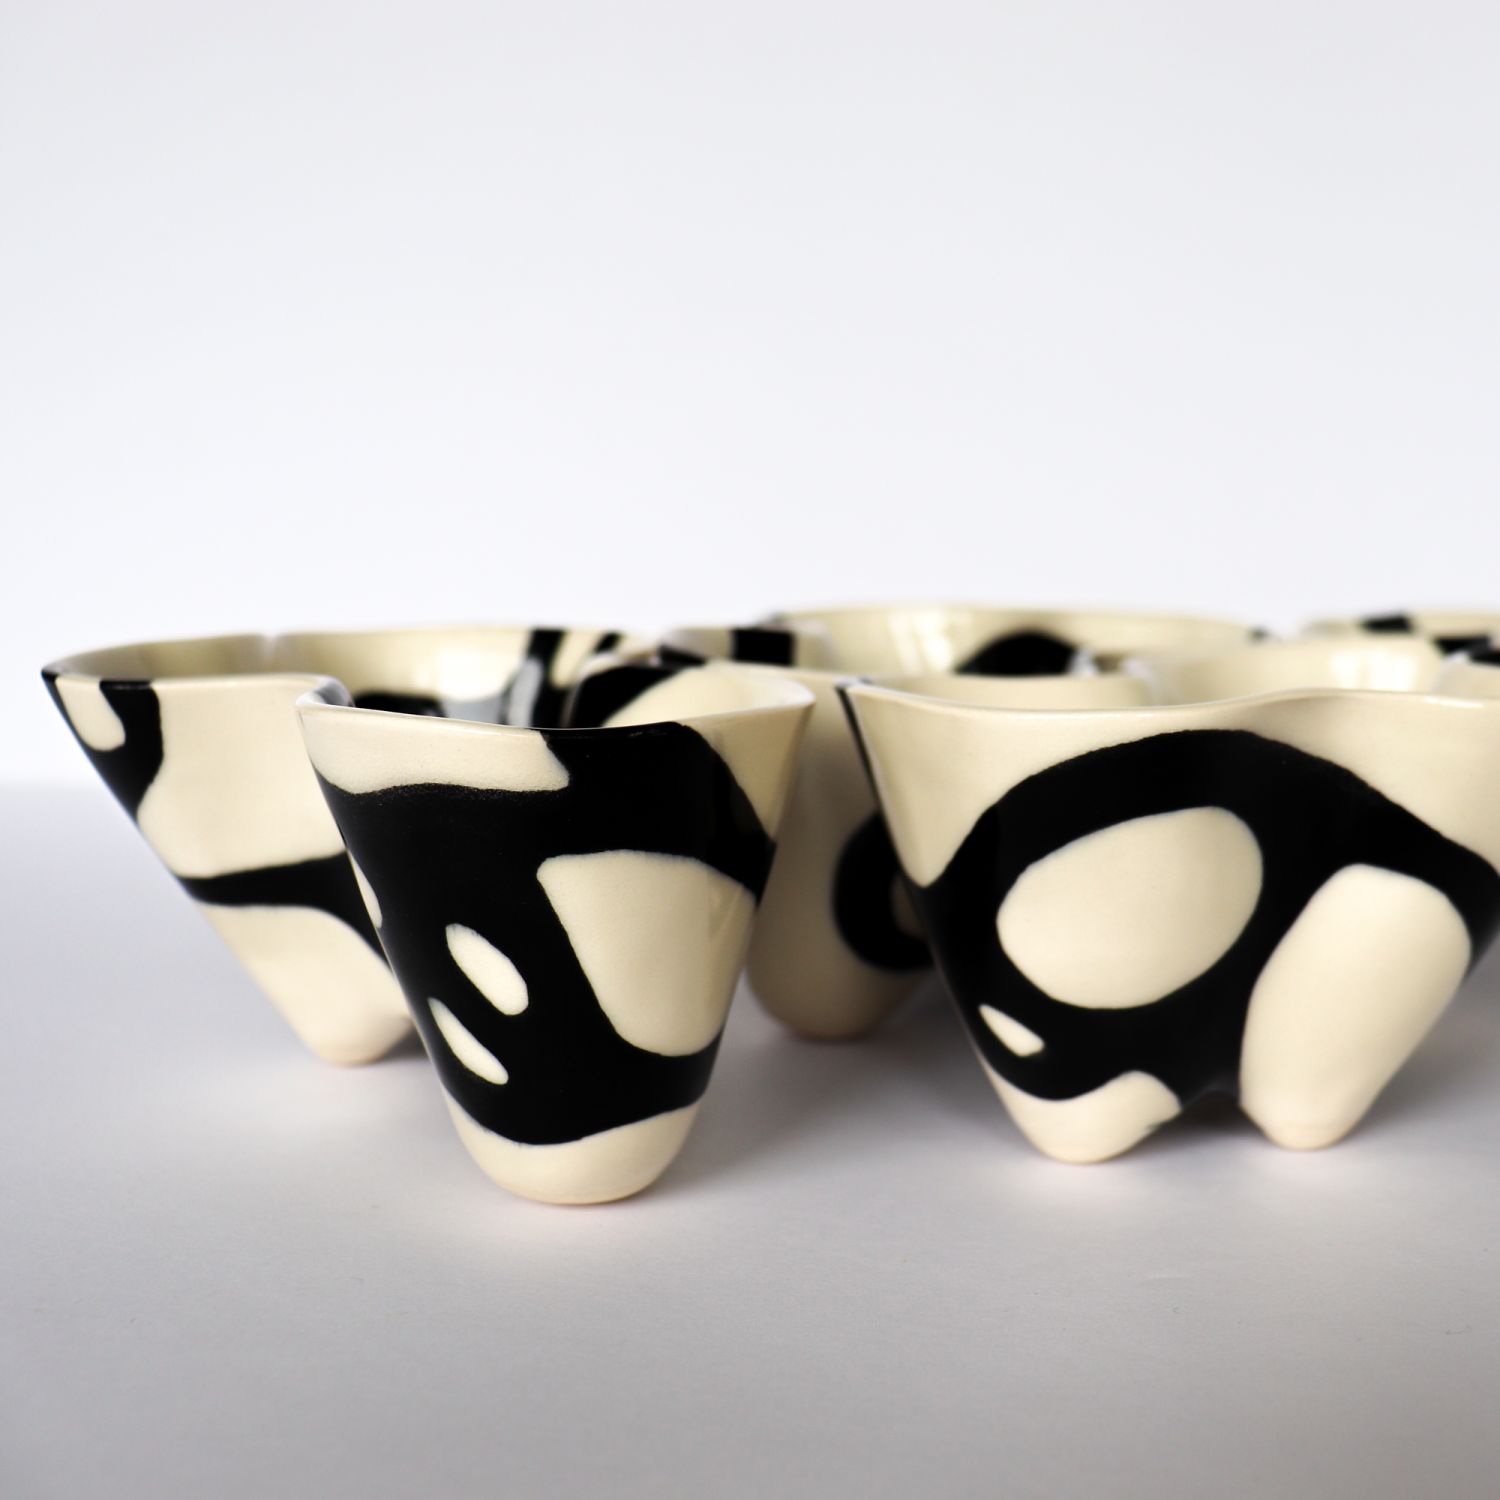 Alana Marcoccia: Interconnected Sculptural Bowl Product Image 6 of 12